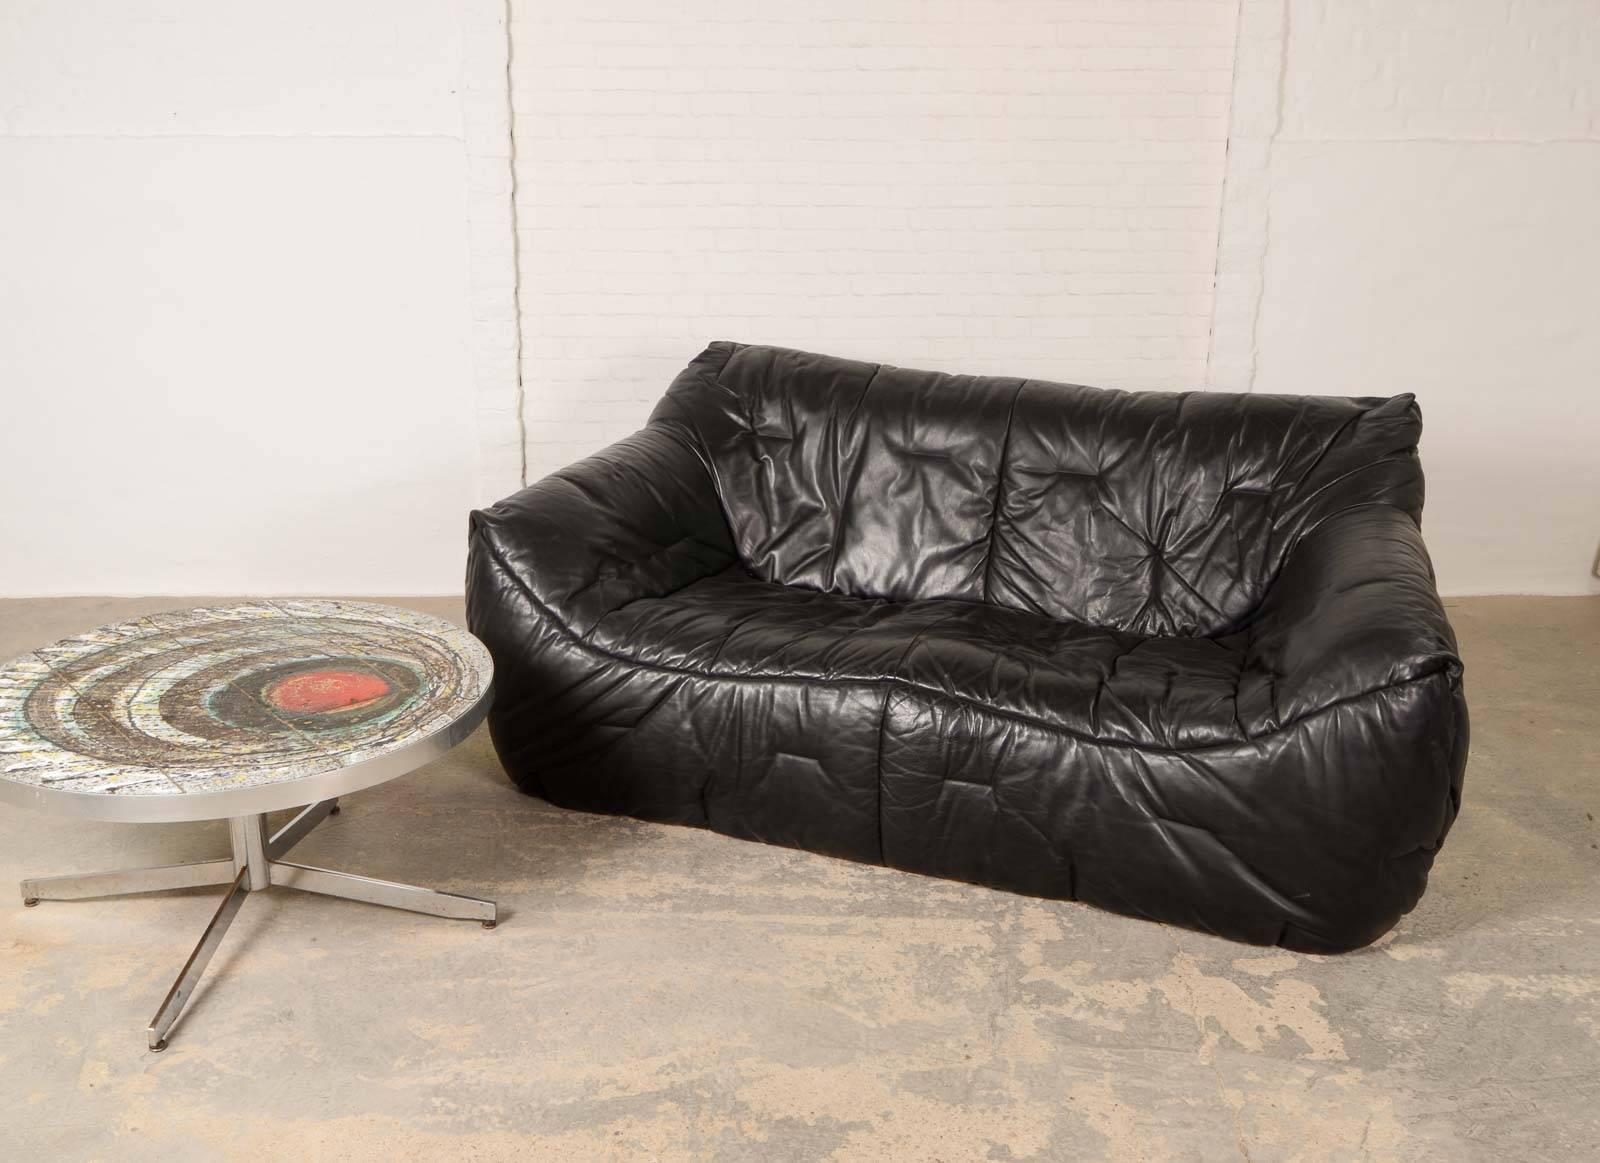 This very comfortable sofa is designed by Hans Hopfer for Roche Bobois in 1984. It is made of beautifully soft black leather upholstered on a soft shell foaming. The condition of the foaming and leather, that features elegant stitching is excellent.